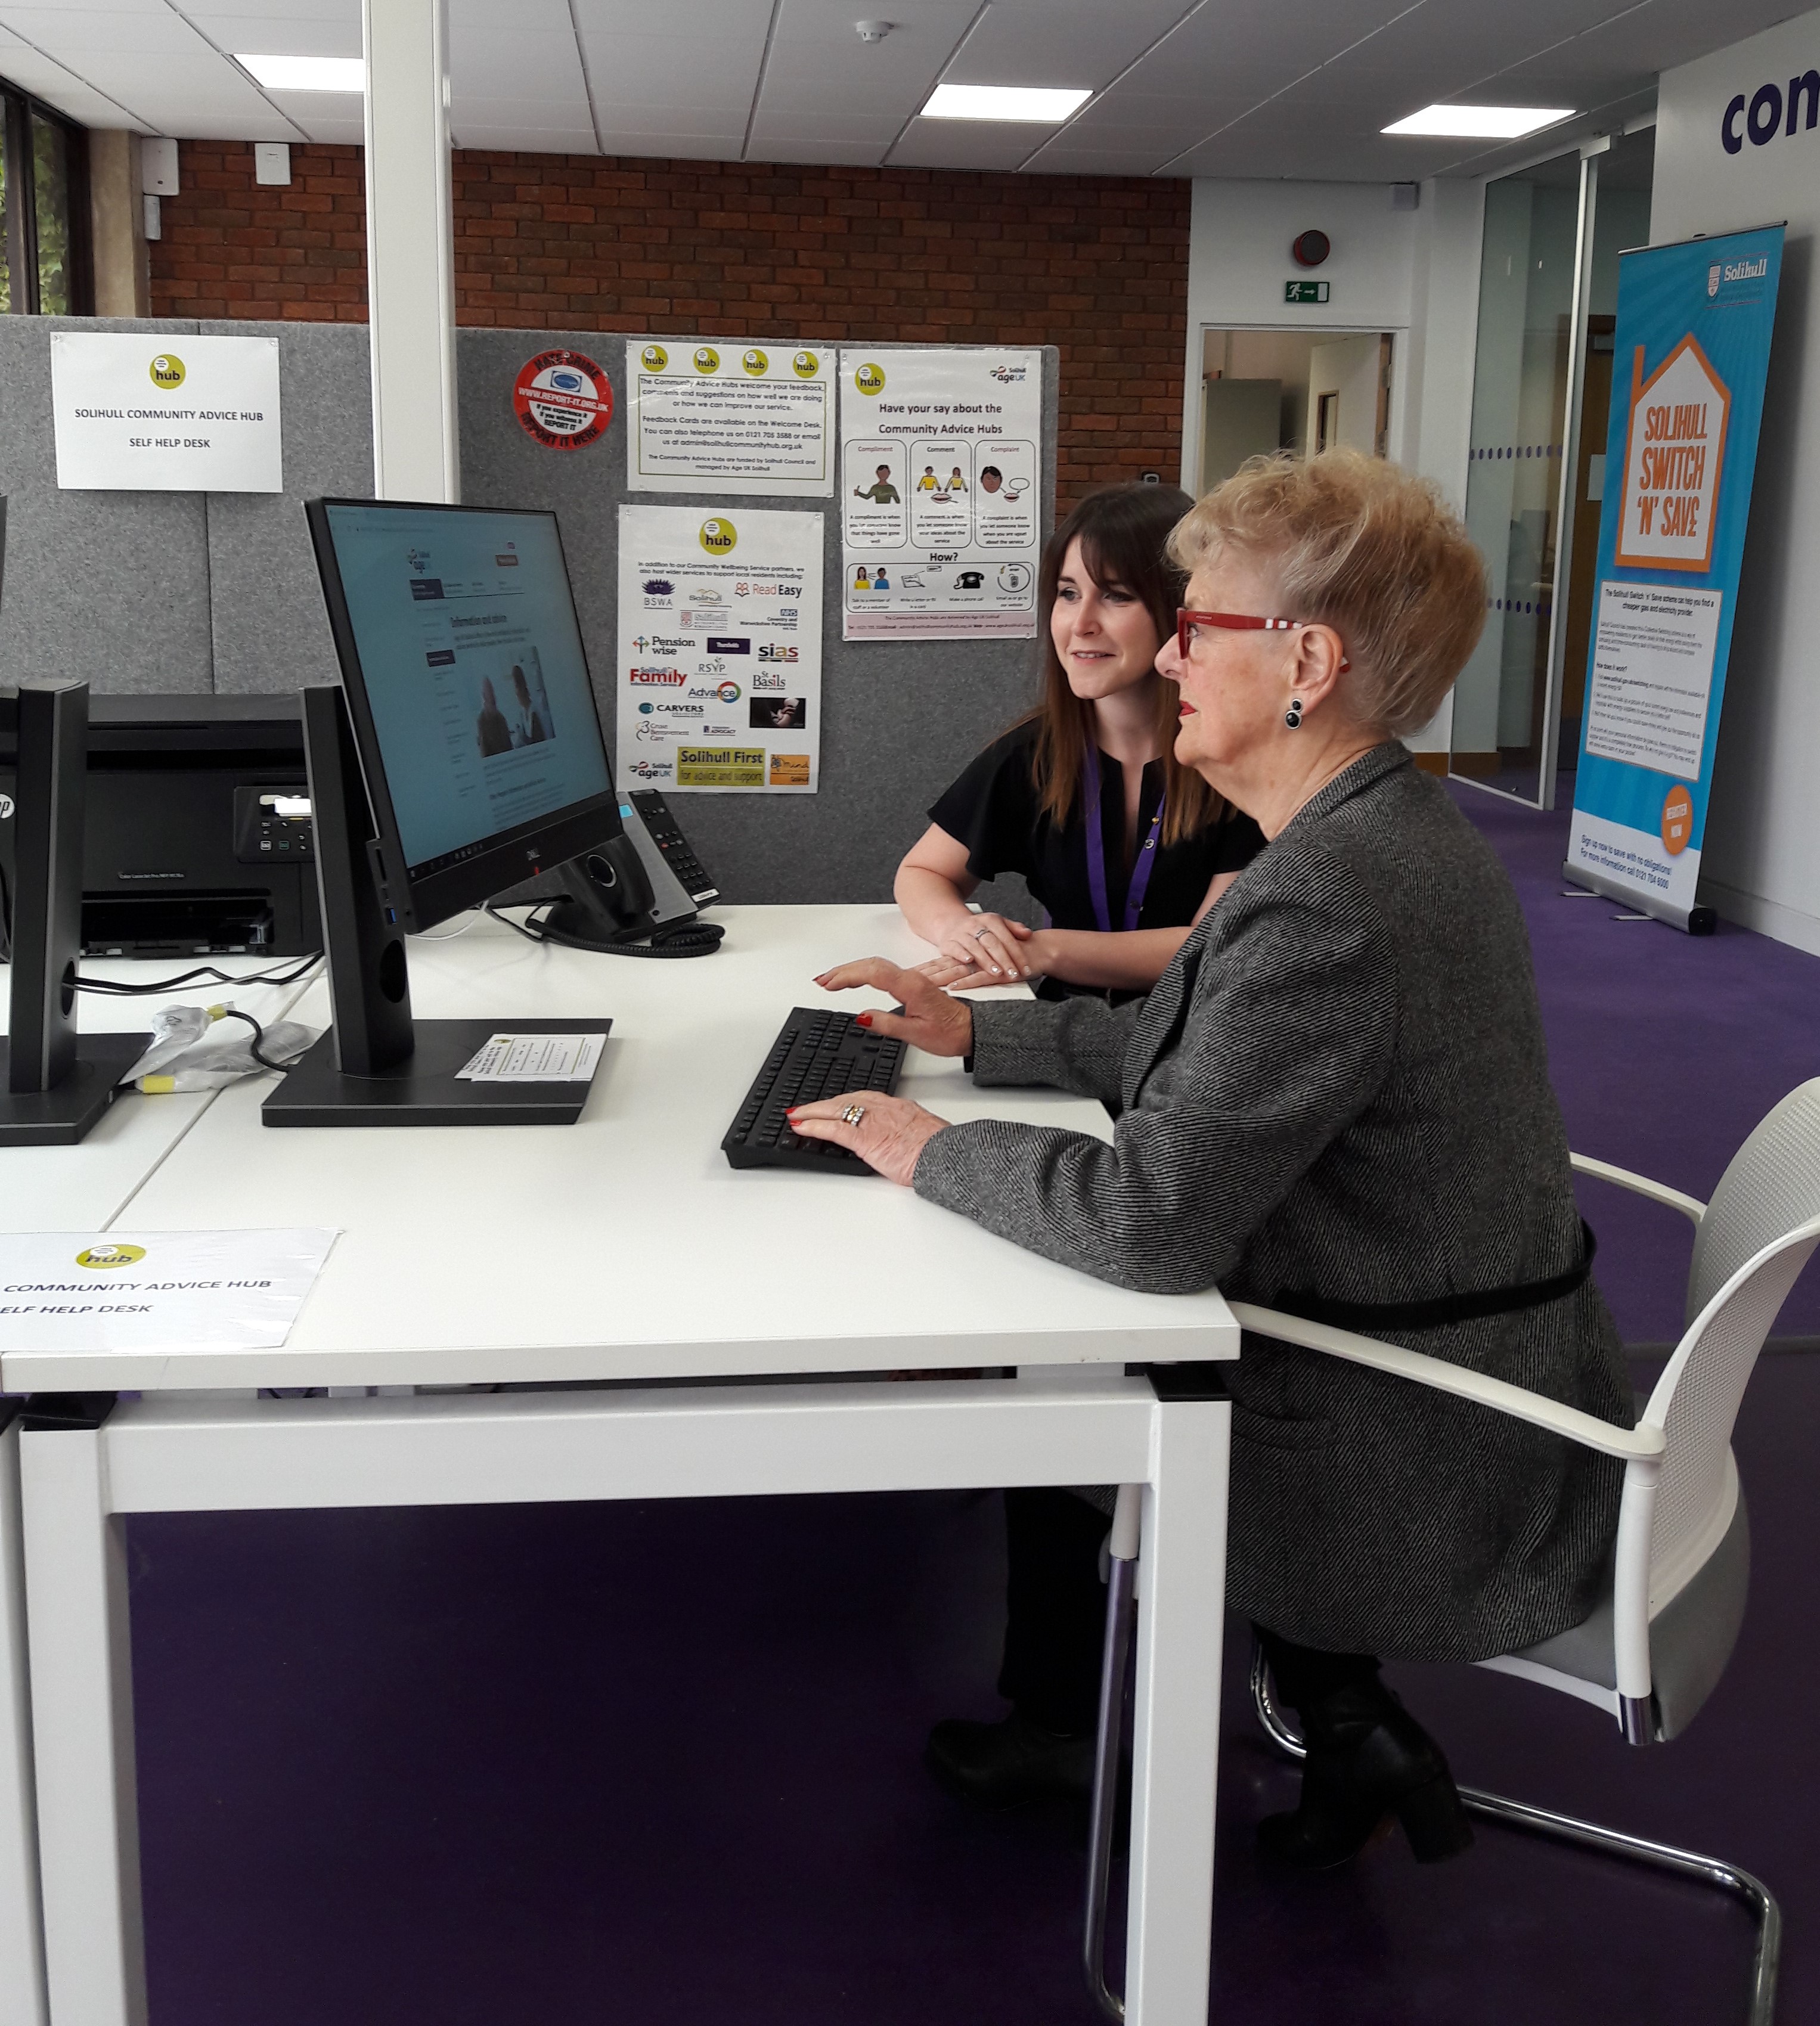 "Margaret" using the self-help PC, with the support of Kate Turrall